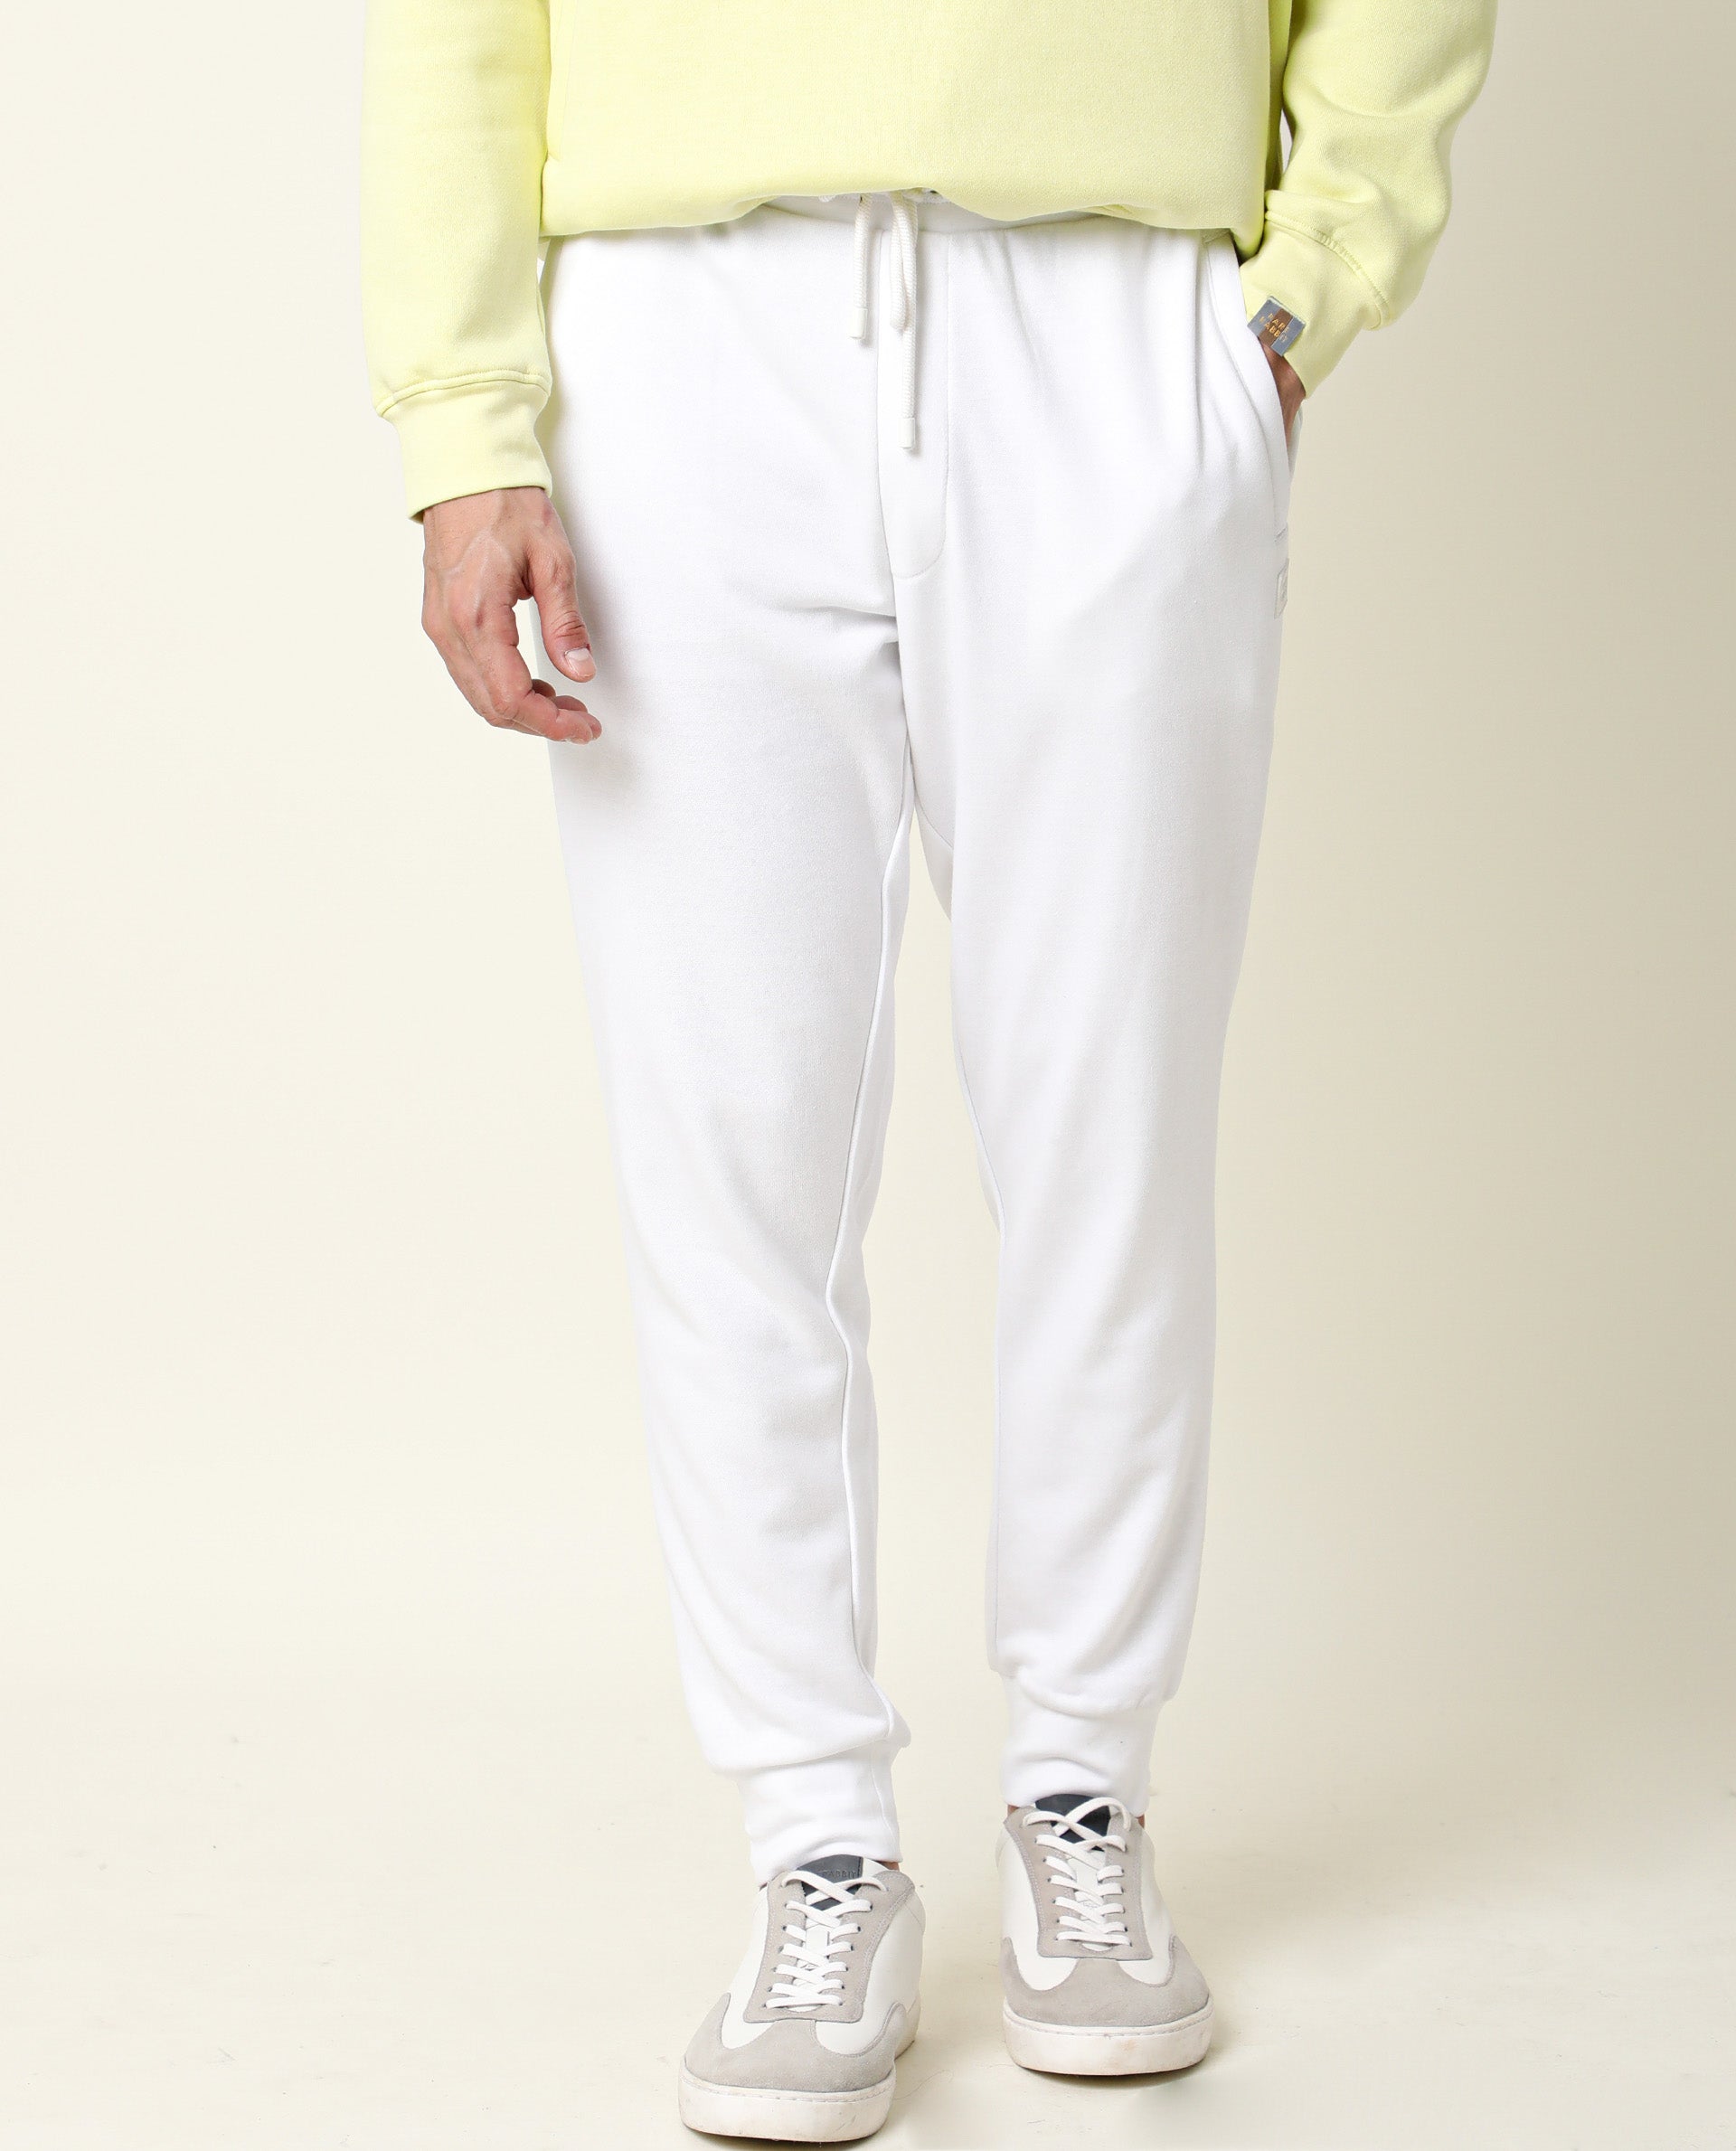 SQUERA Colorblock Men Grey, White Track Pants - Buy SQUERA Colorblock Men  Grey, White Track Pants Online at Best Prices in India | Flipkart.com